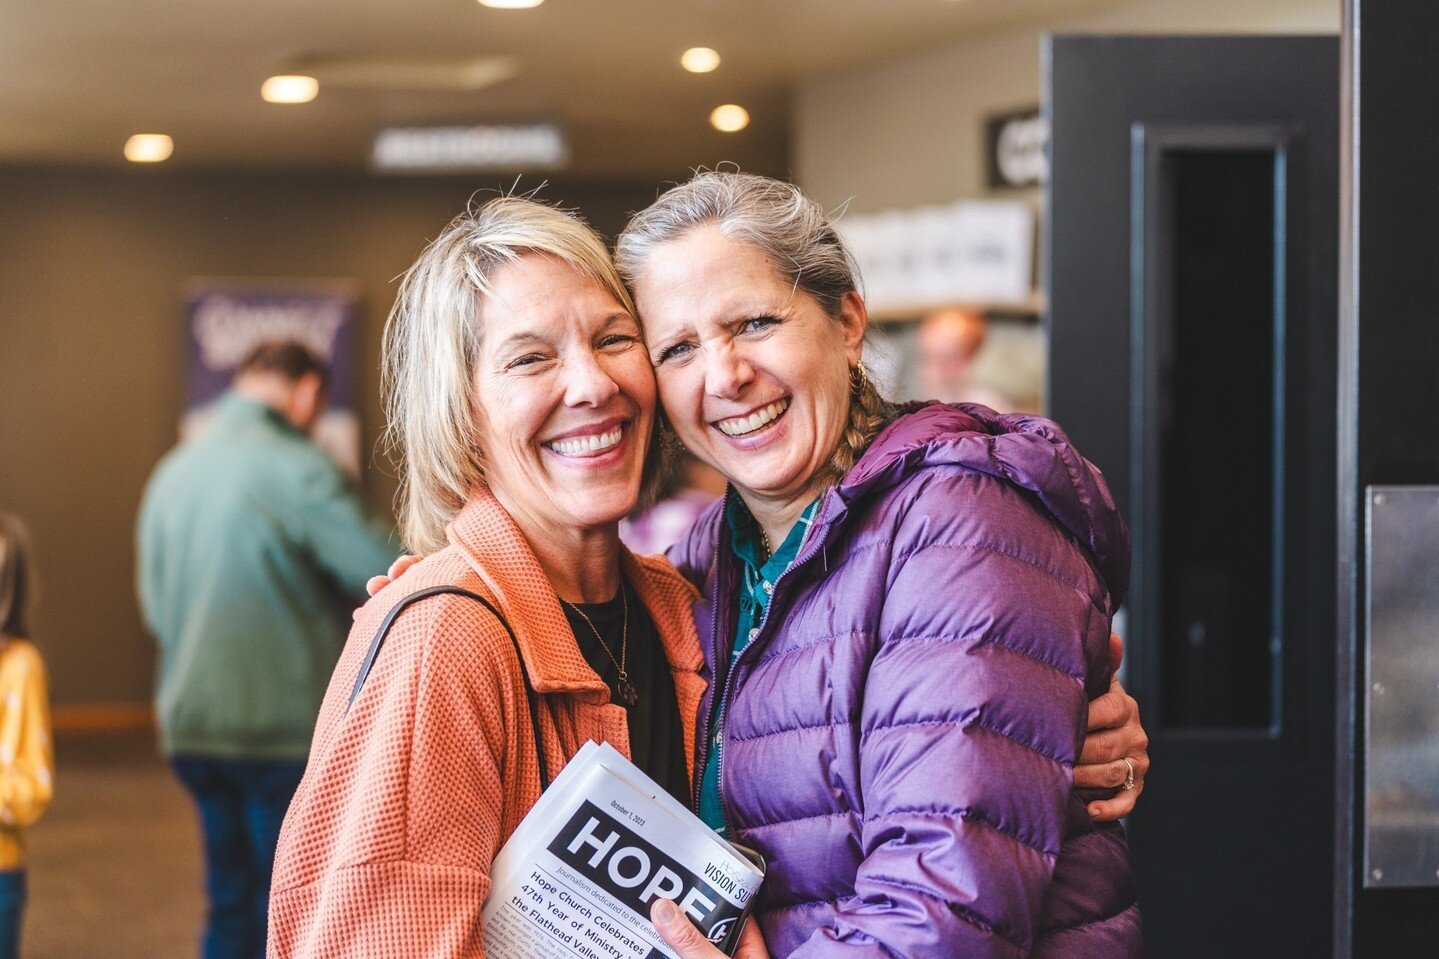 We were never meant to walk through life alone. Find a group and find your people! Connect Groups and Rooted Groups are officially open for sign-ups and kick off on February 21st! Learn more about our group options at hopechurchmt.com/groups